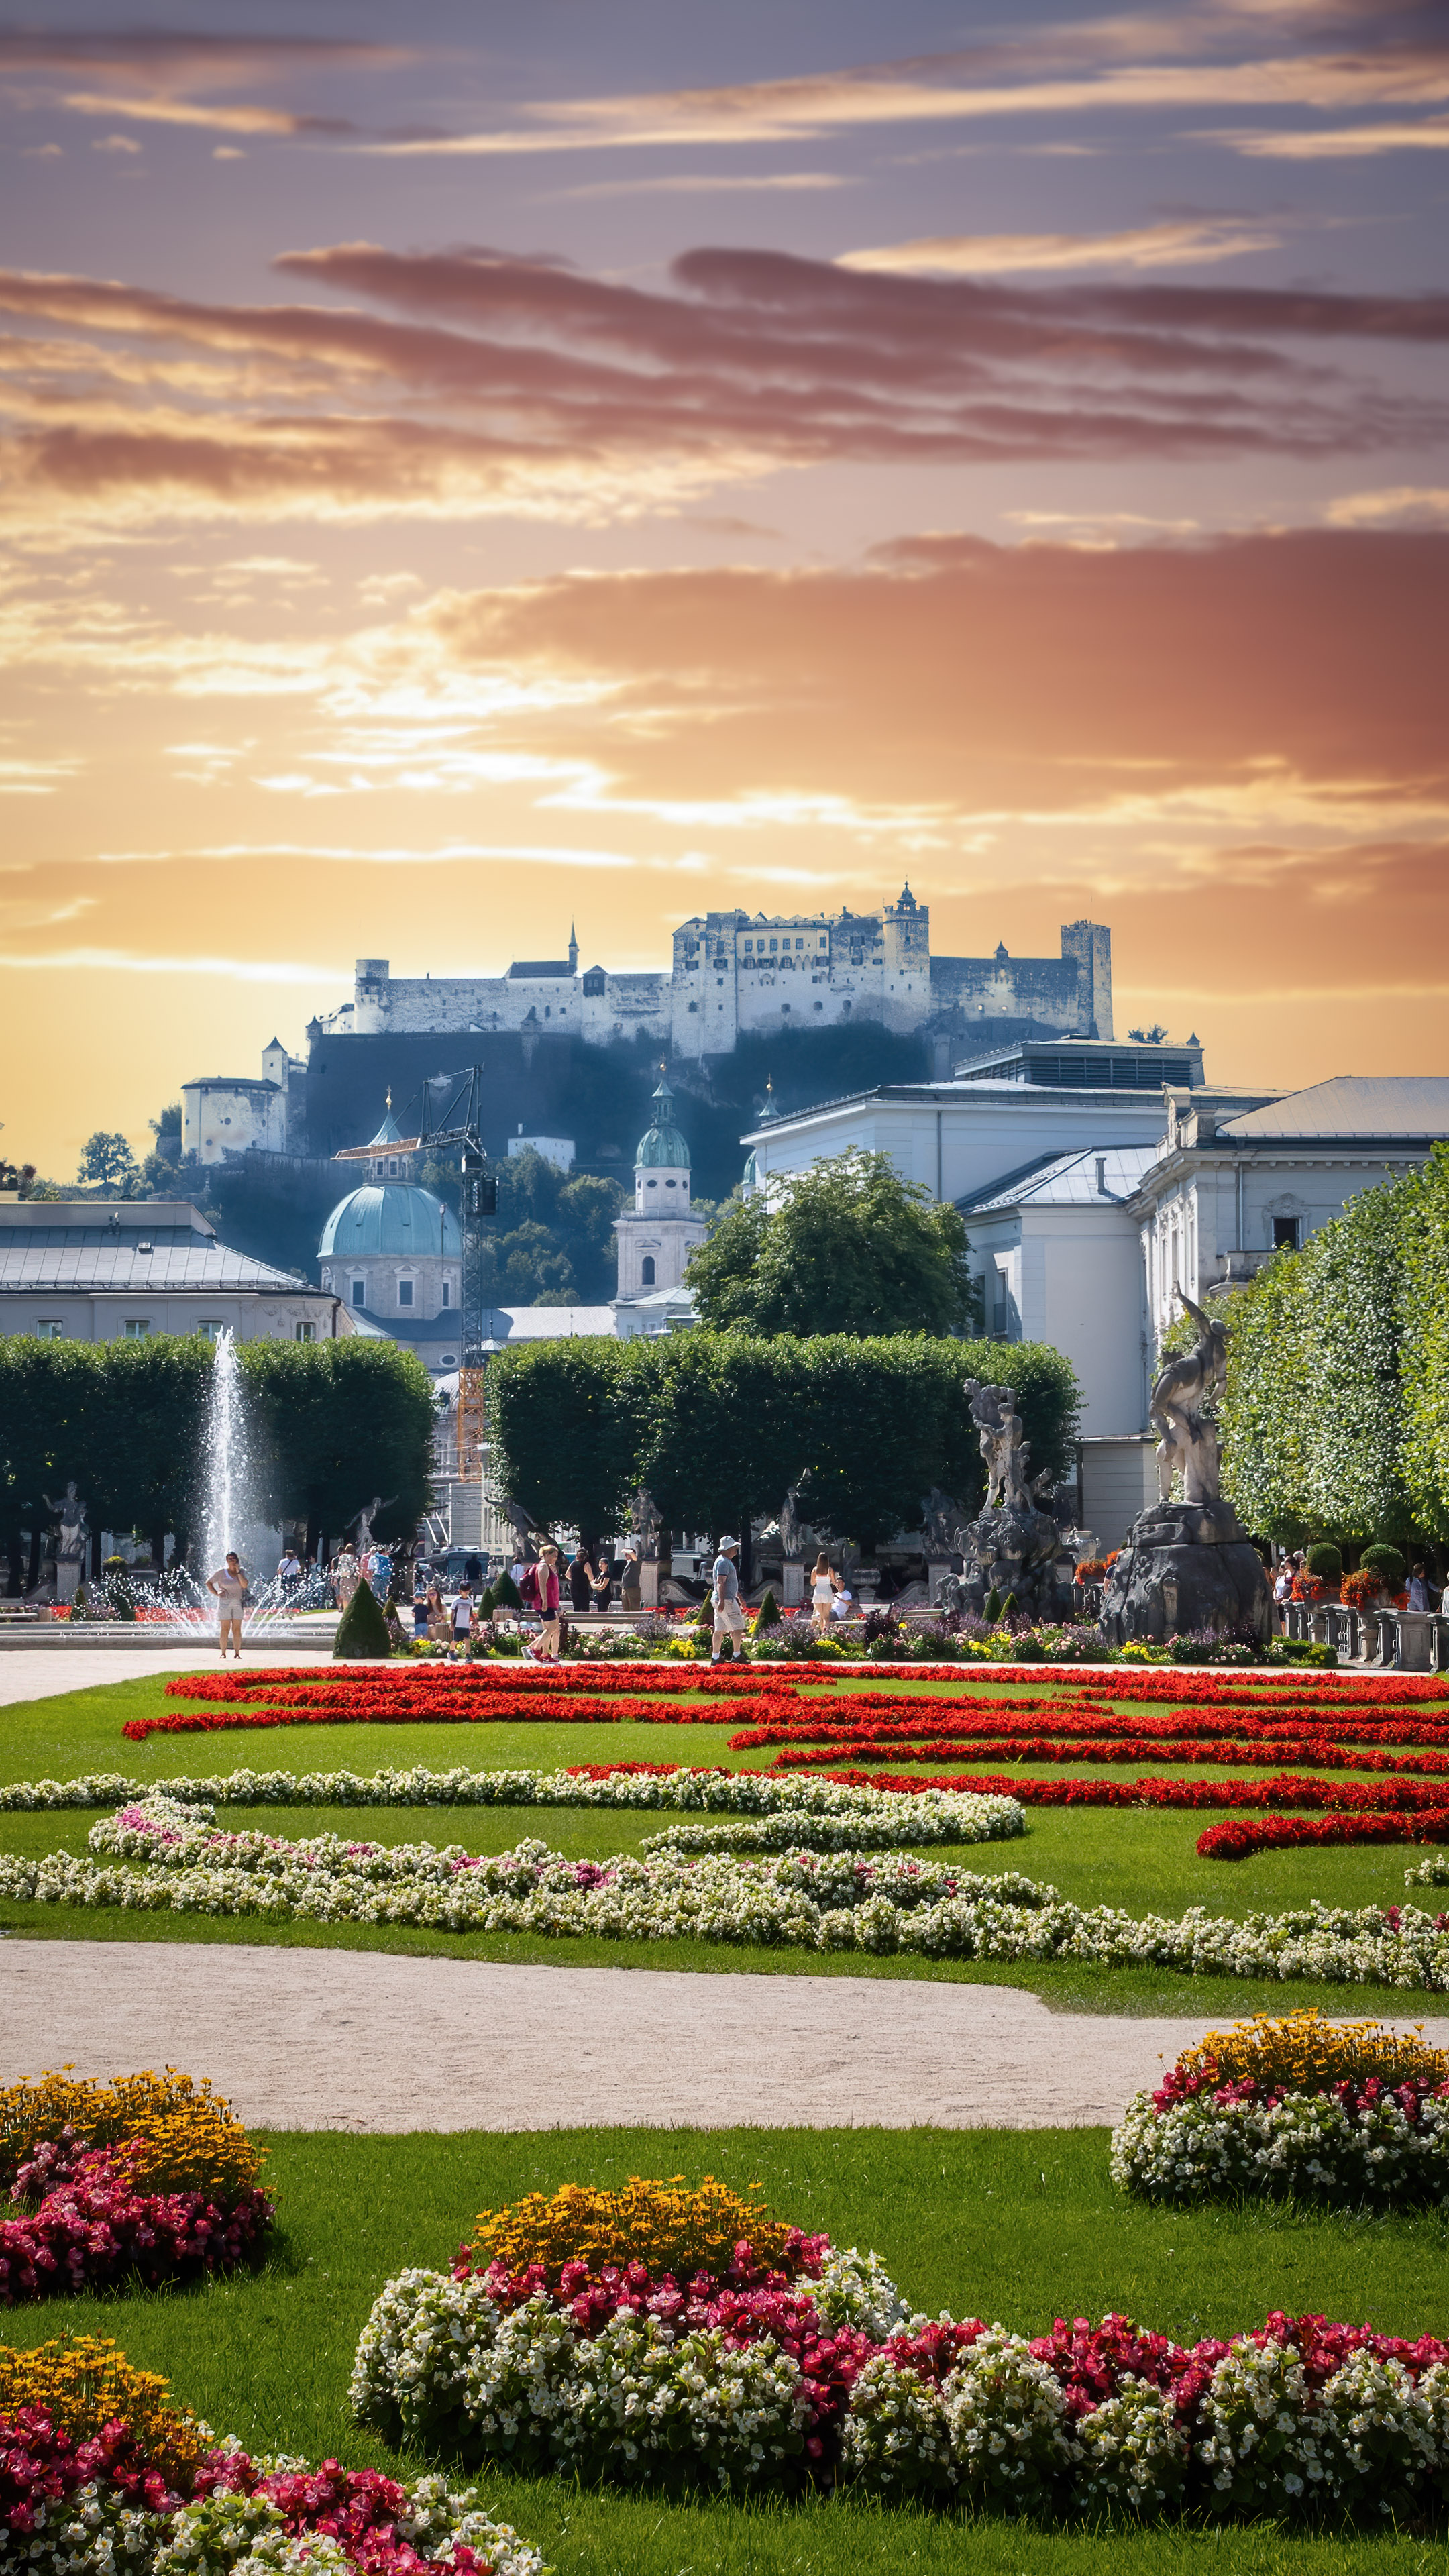 SGet the best city wallpaper for your iPhone with these beautiful images of Salzburg, Austria.